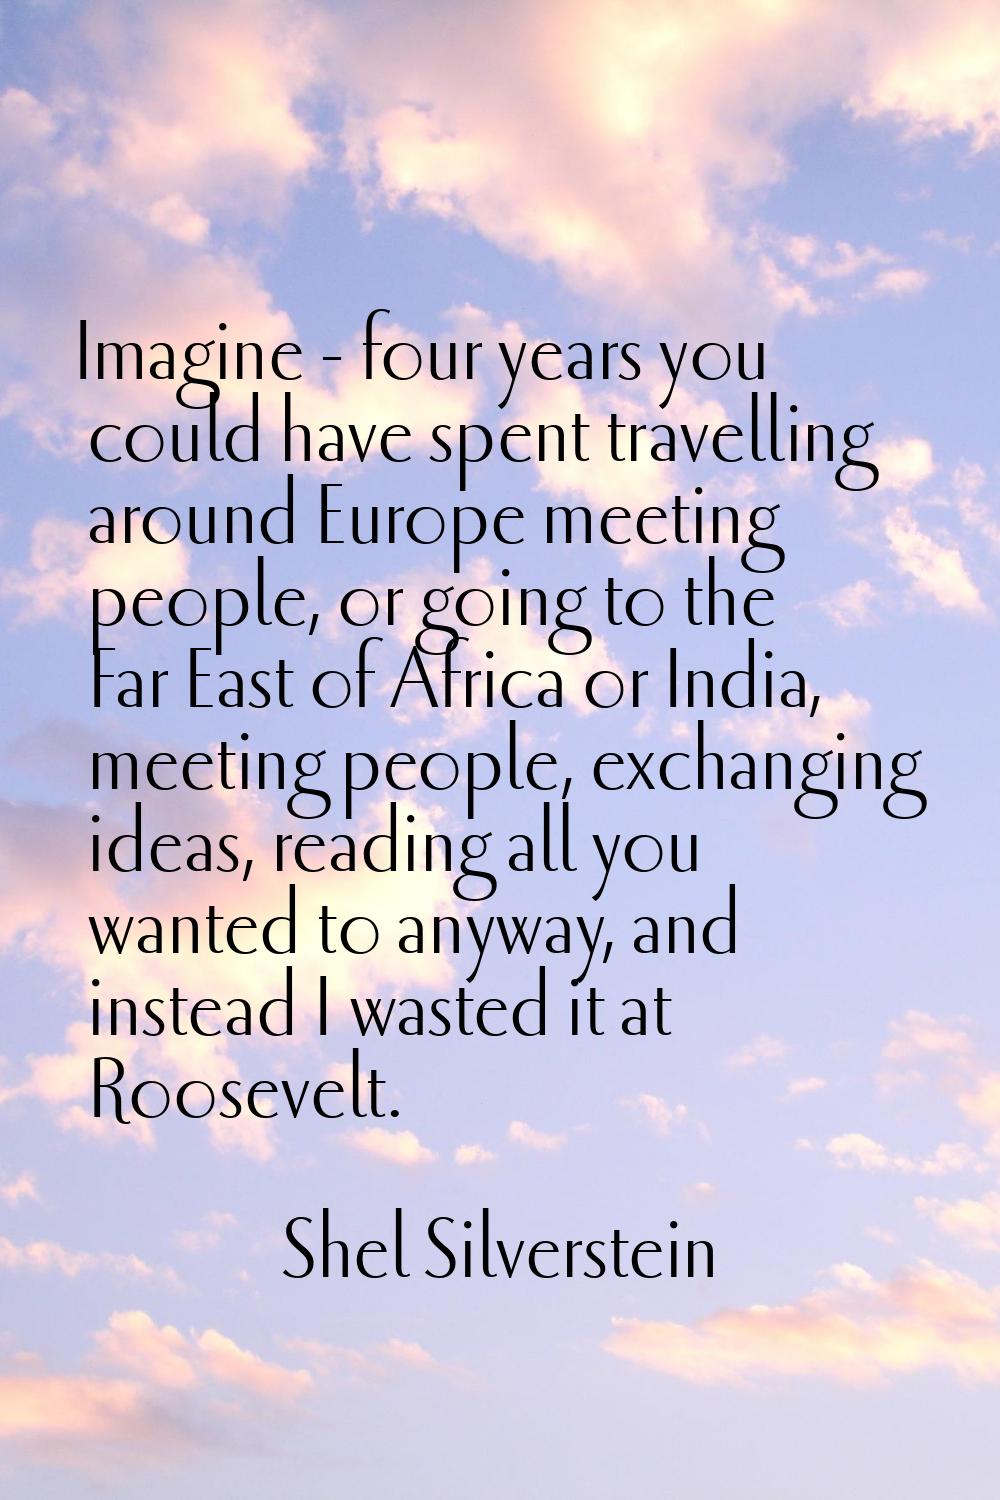 Imagine - four years you could have spent travelling around Europe meeting people, or going to the 